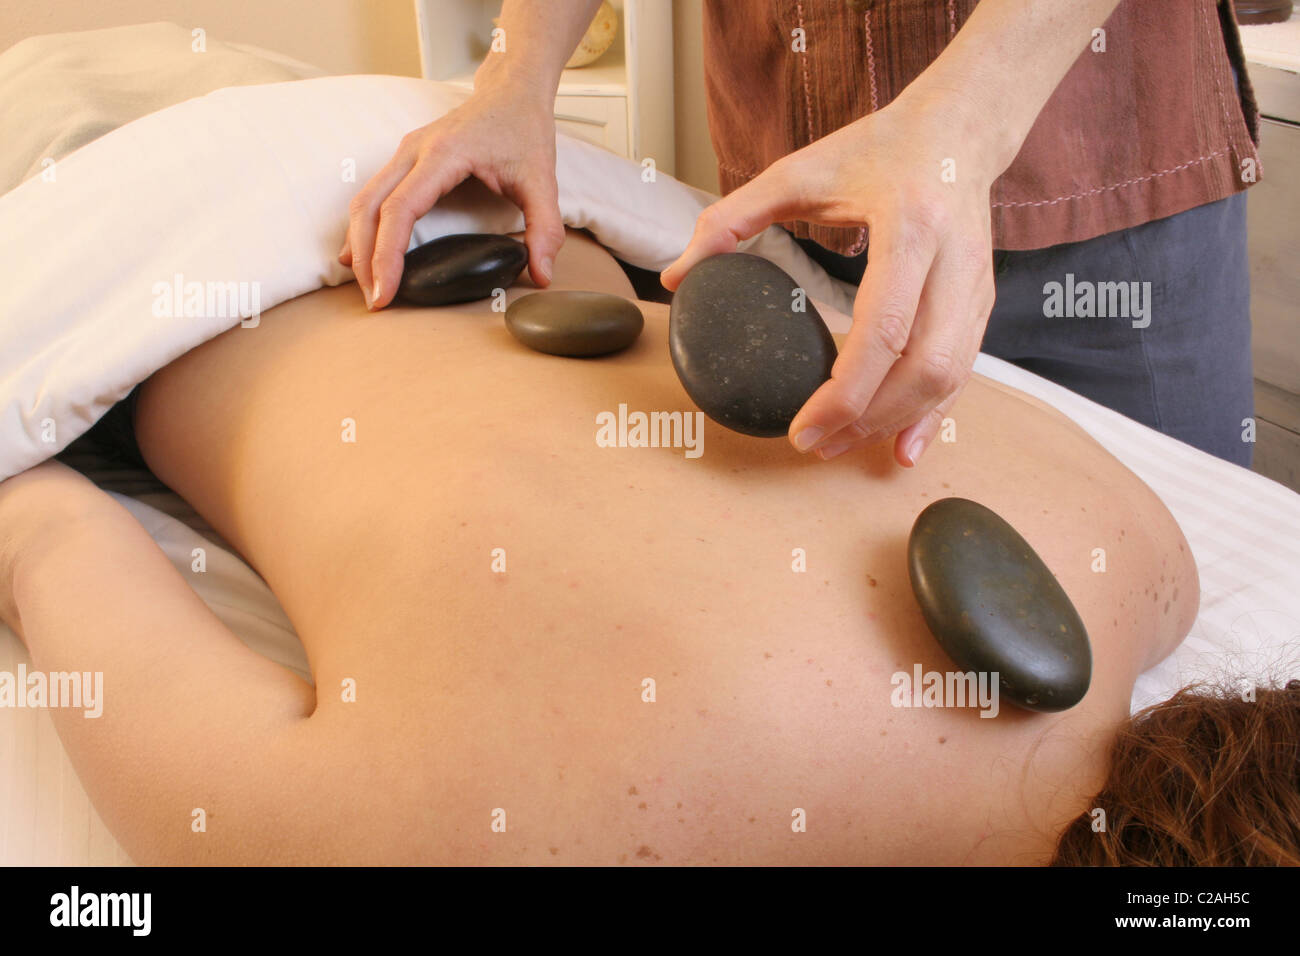 Released health spa massage therapist places heated stones on back Stock Photo